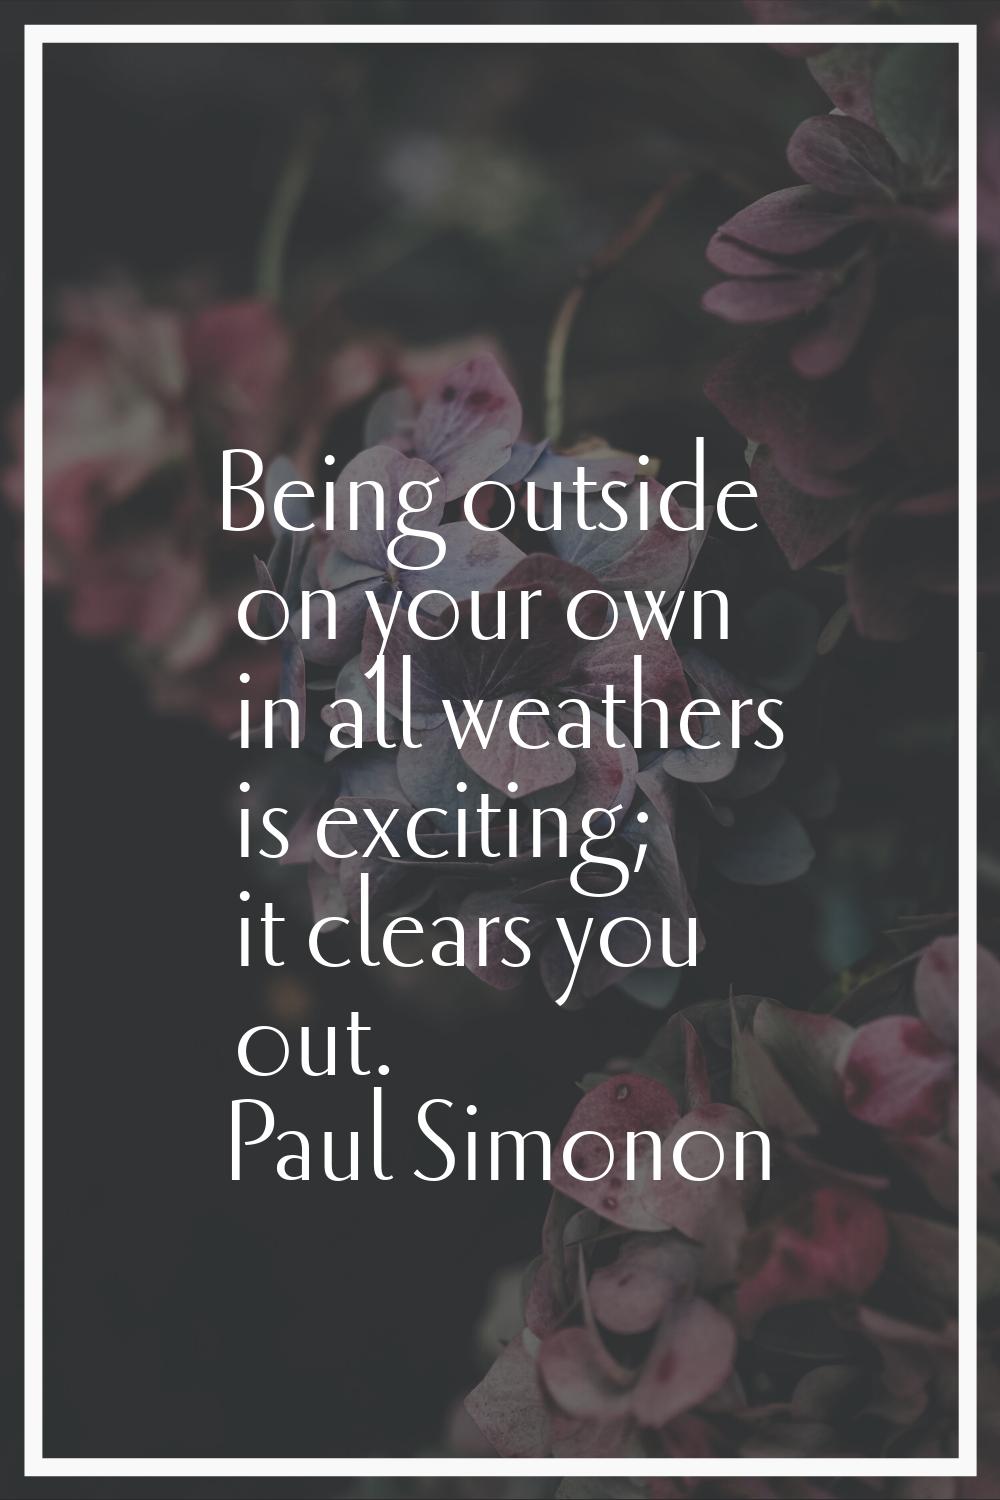 Being outside on your own in all weathers is exciting; it clears you out.